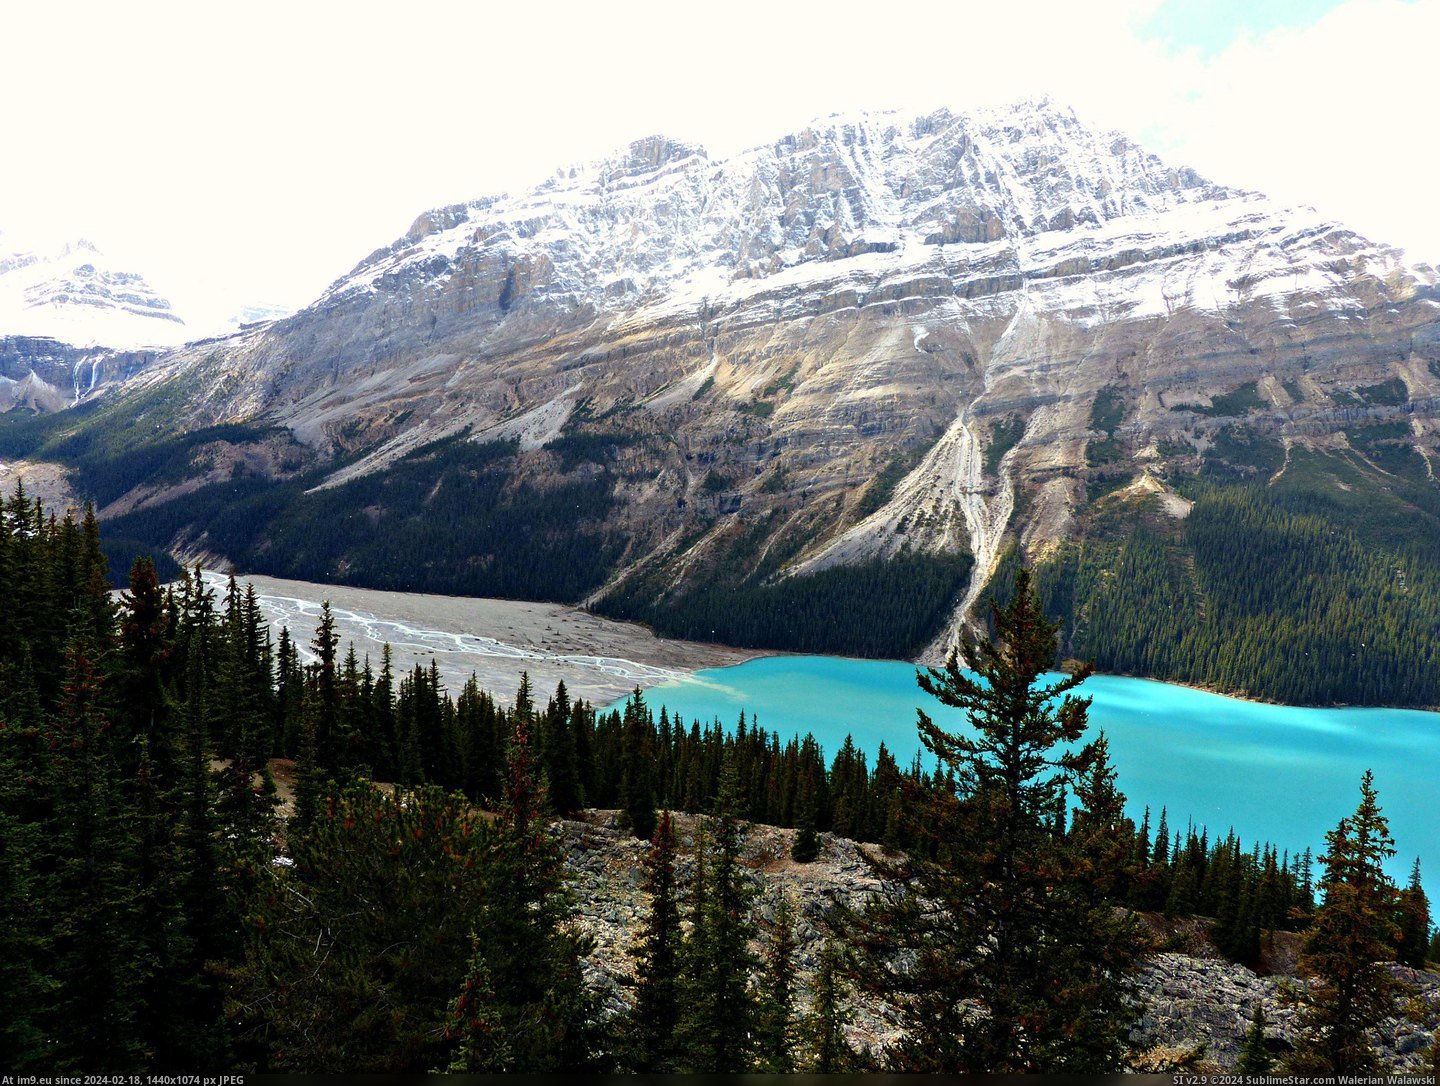 #Lake #Perfection #Peyto #Canada [Earthporn] First post! Cyan perfection at Peyto Lake, Canada [3128x2346] Pic. (Bild von album My r/EARTHPORN favs))